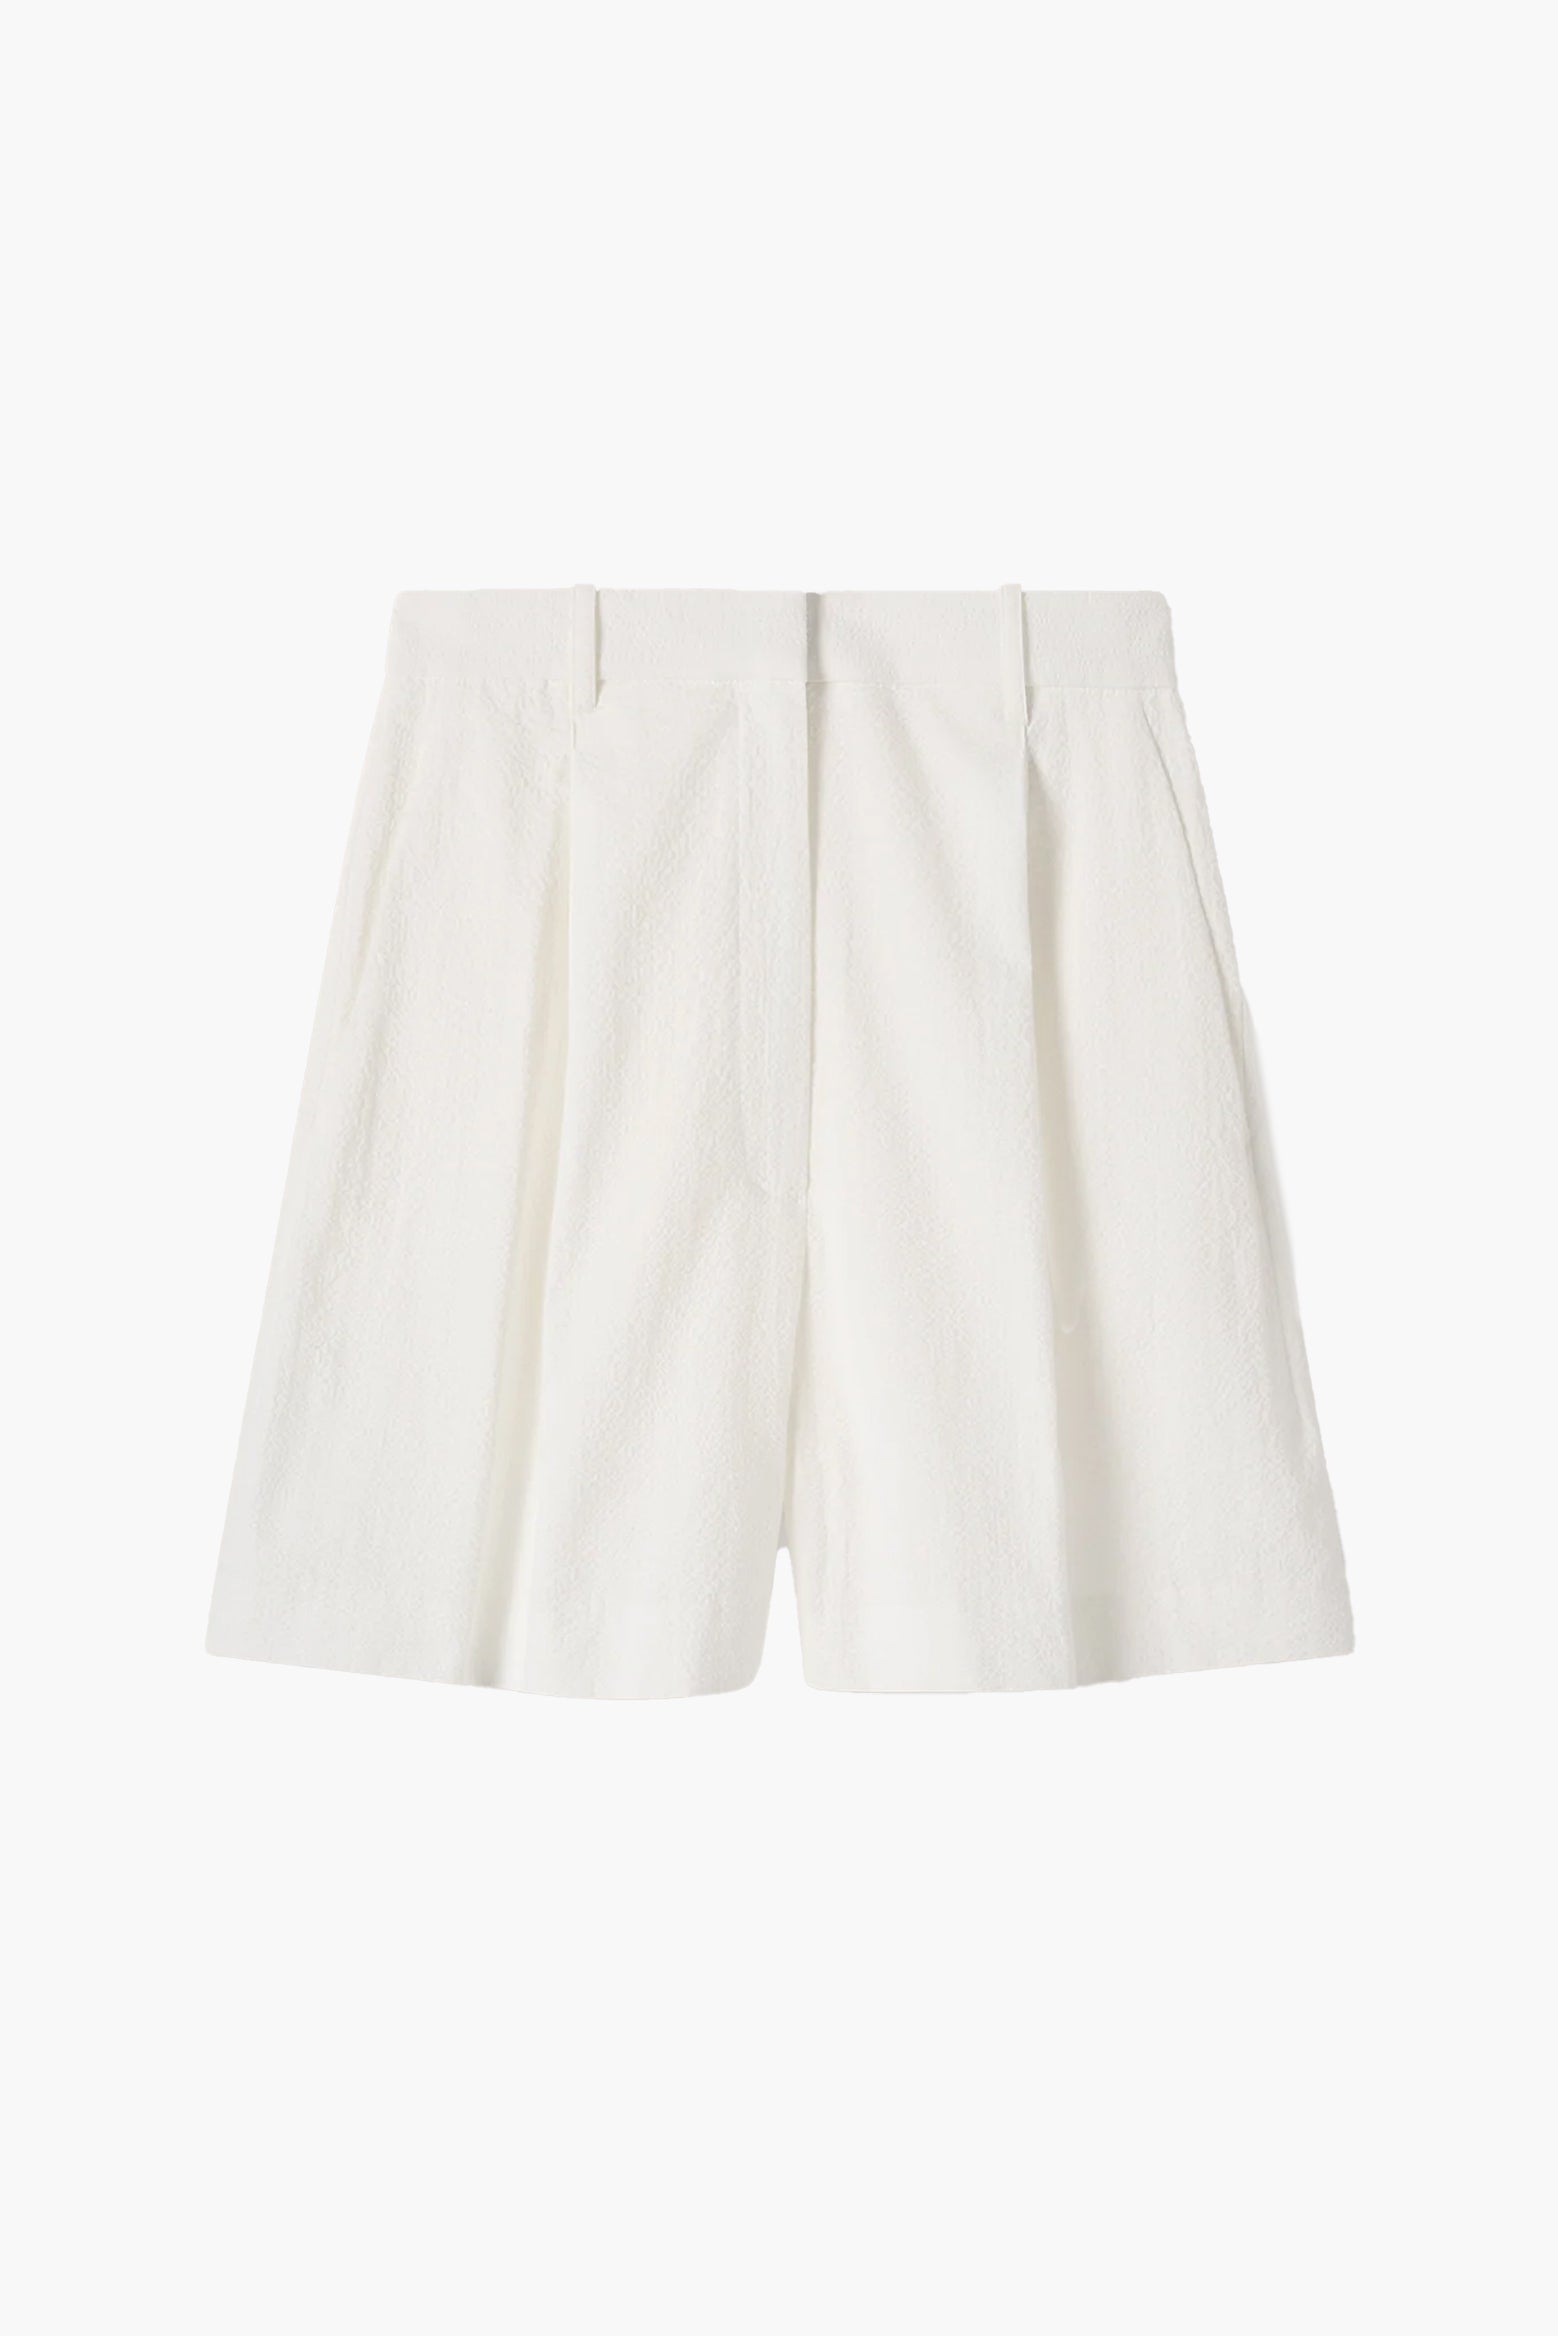 A.Emery Astor Short in Parchment available at The New Trend Australia.